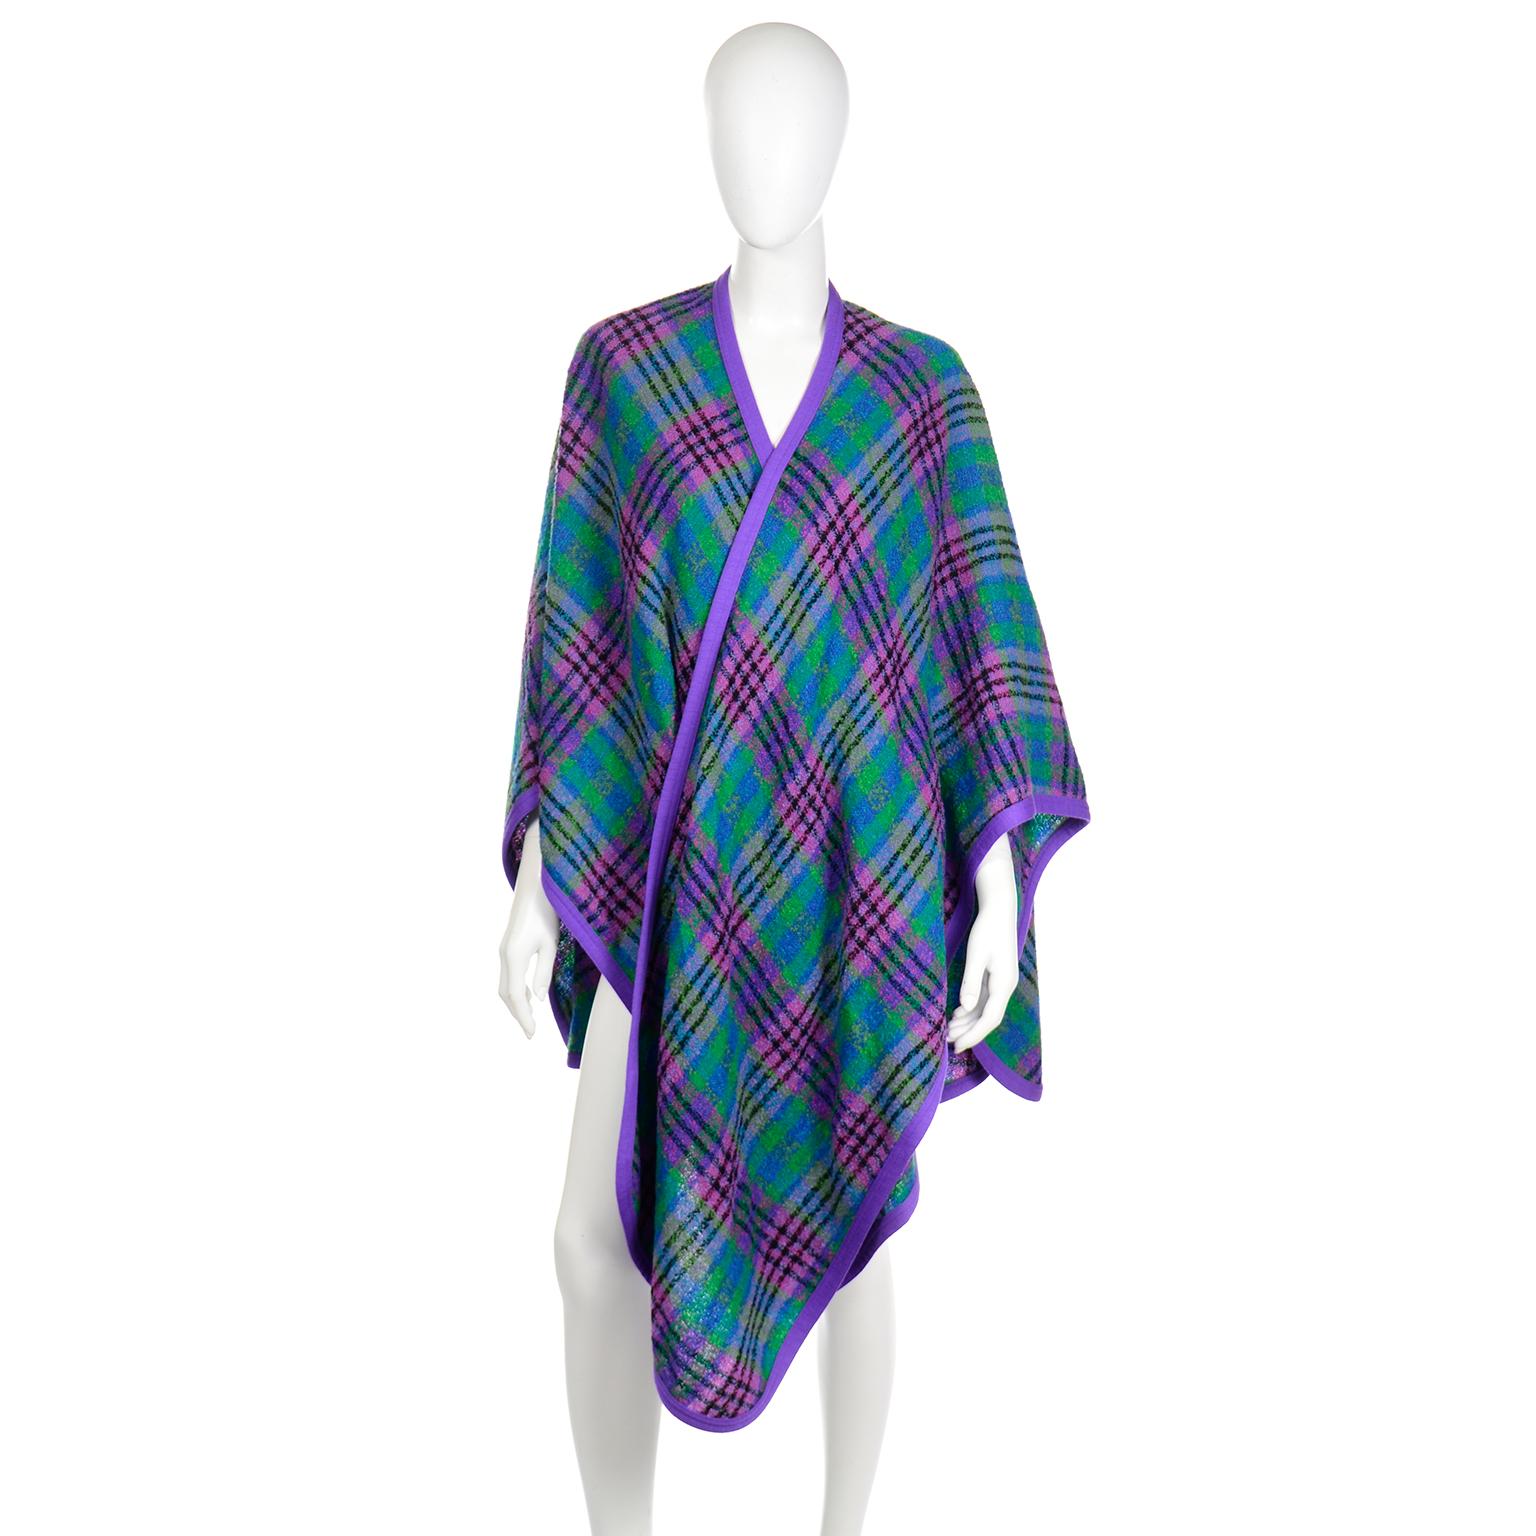 This vintage open front Louis Feraud Purple and Green cape style wrap would be such a great addition to your wardrobe!  This fabulous plaid wrap is so easy to throw on to add instant style to any outfit. We love wraps like these because they can be